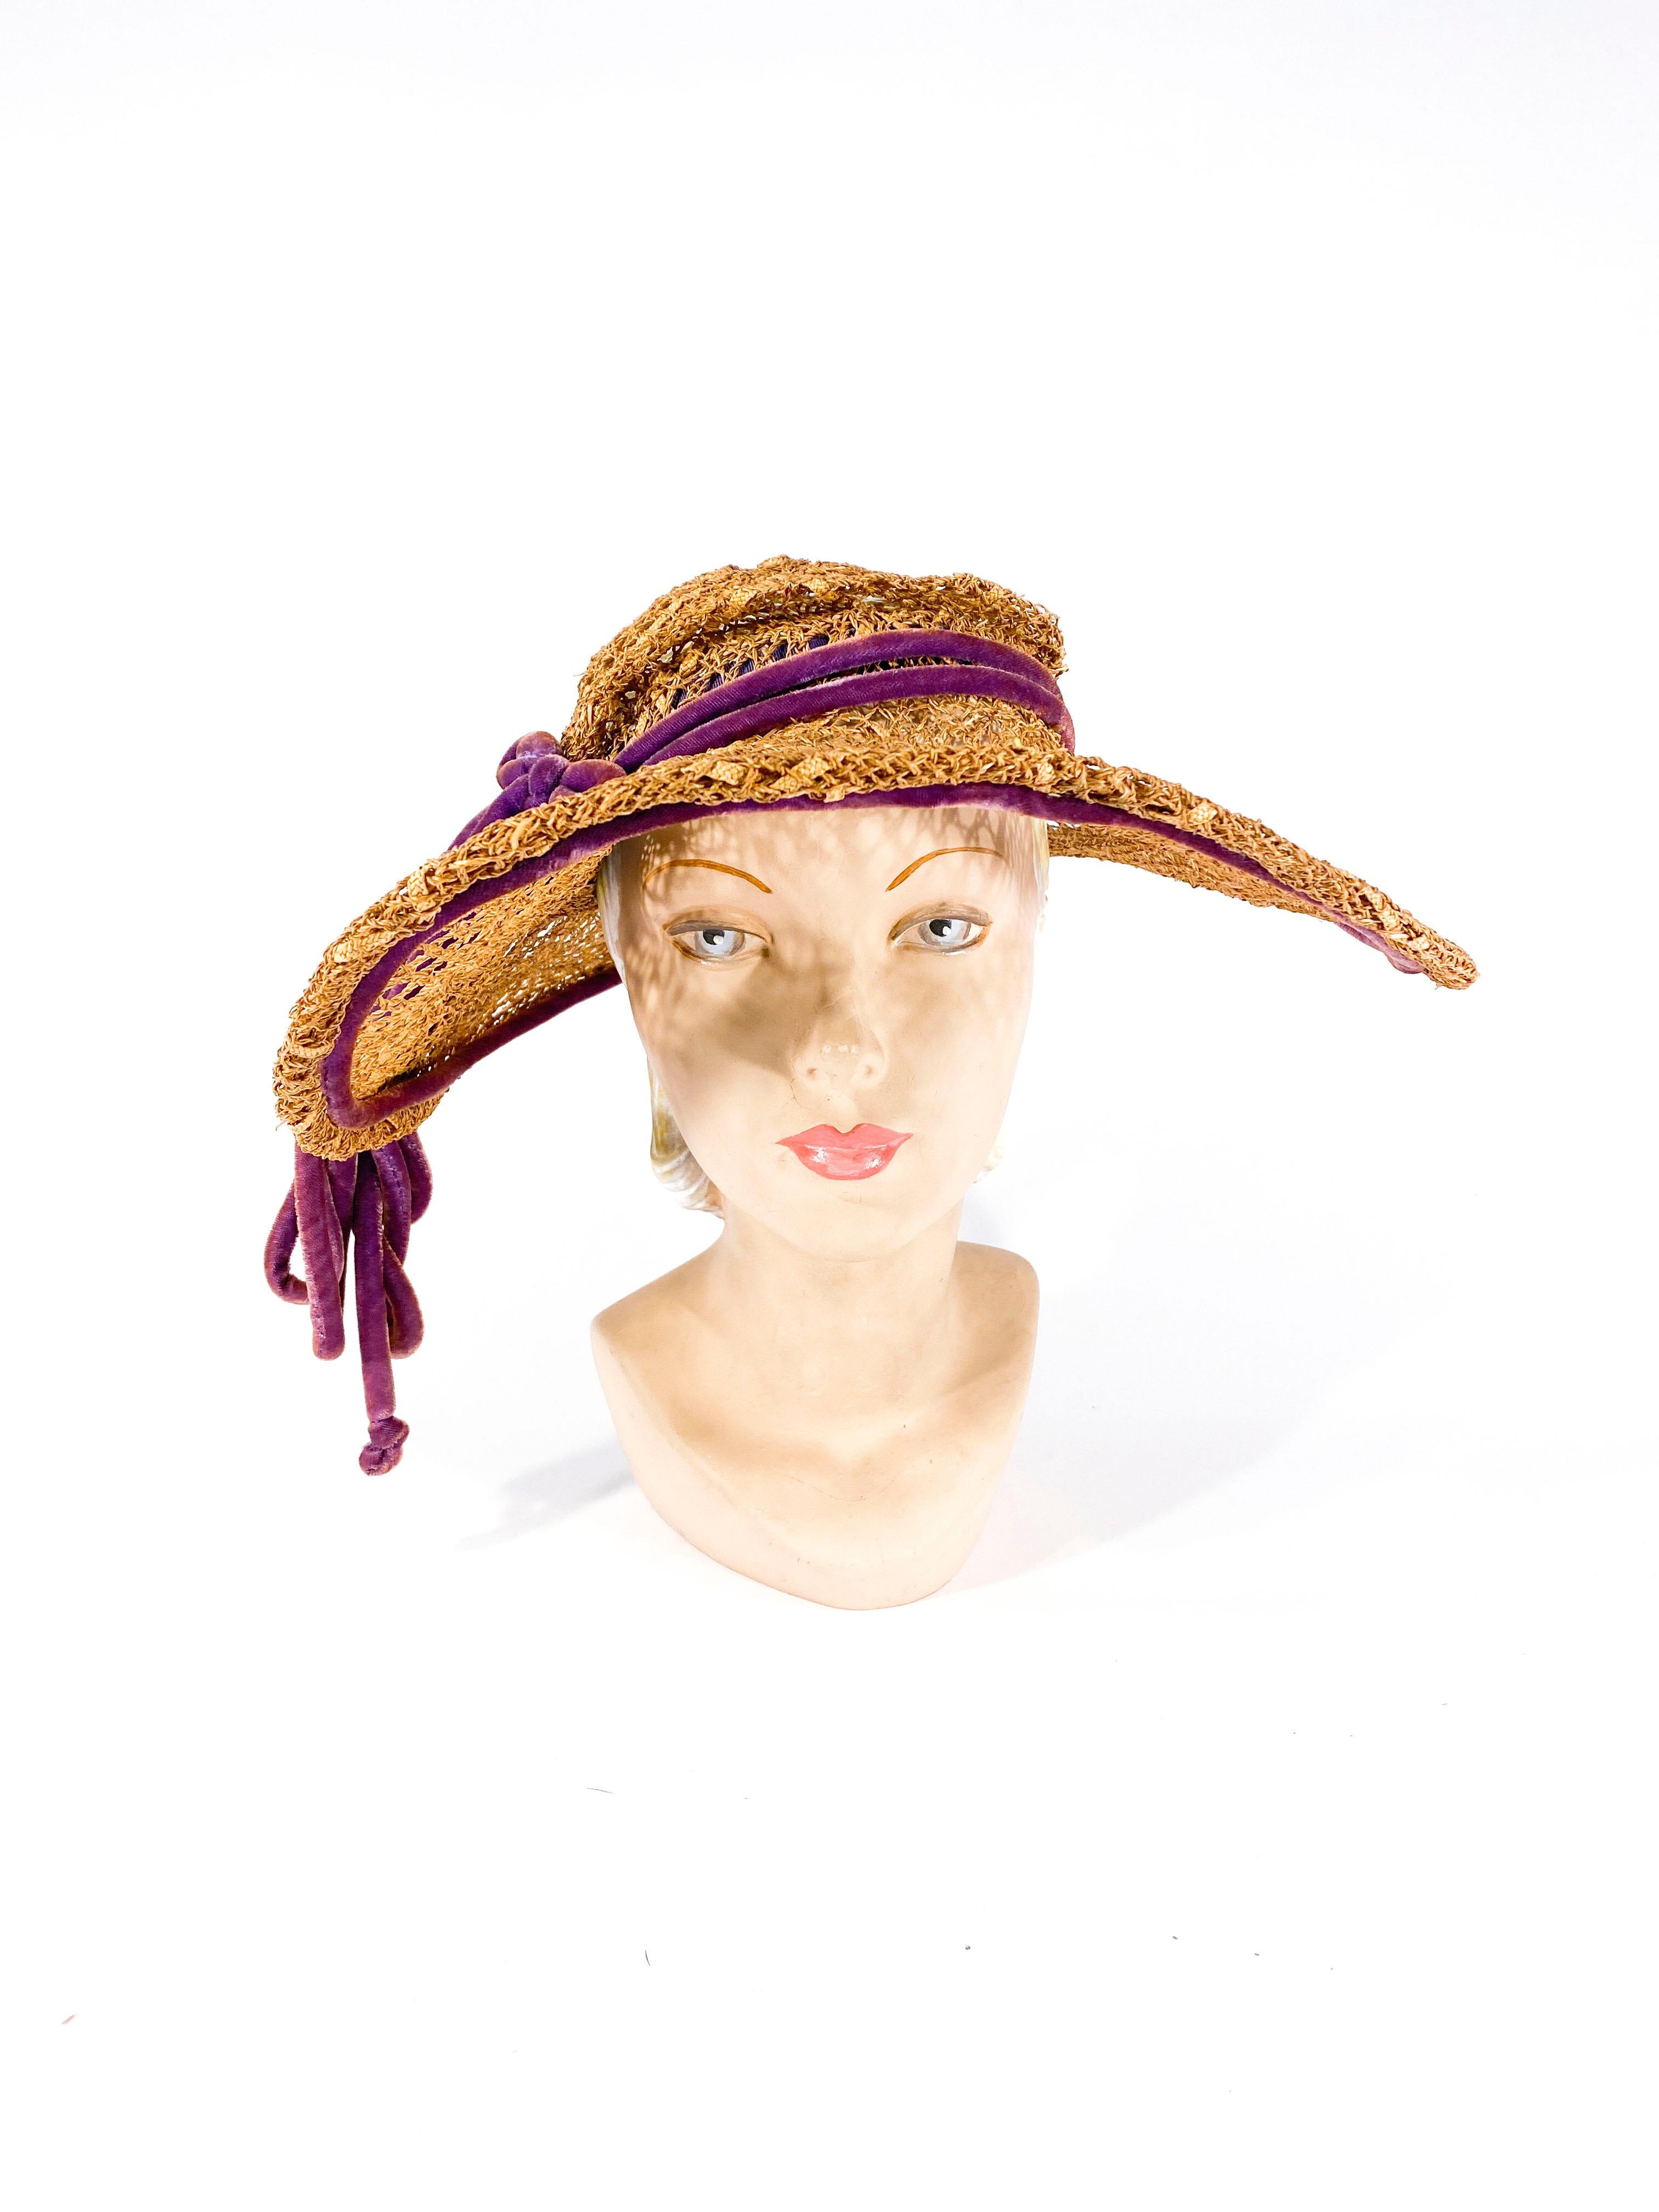 1930s handwoven straw picture hat that is unlined and meant to be worn in the summer. The wide brim is wired and the hat is finished with a hand made light purple velvet cord band and oversized bow.